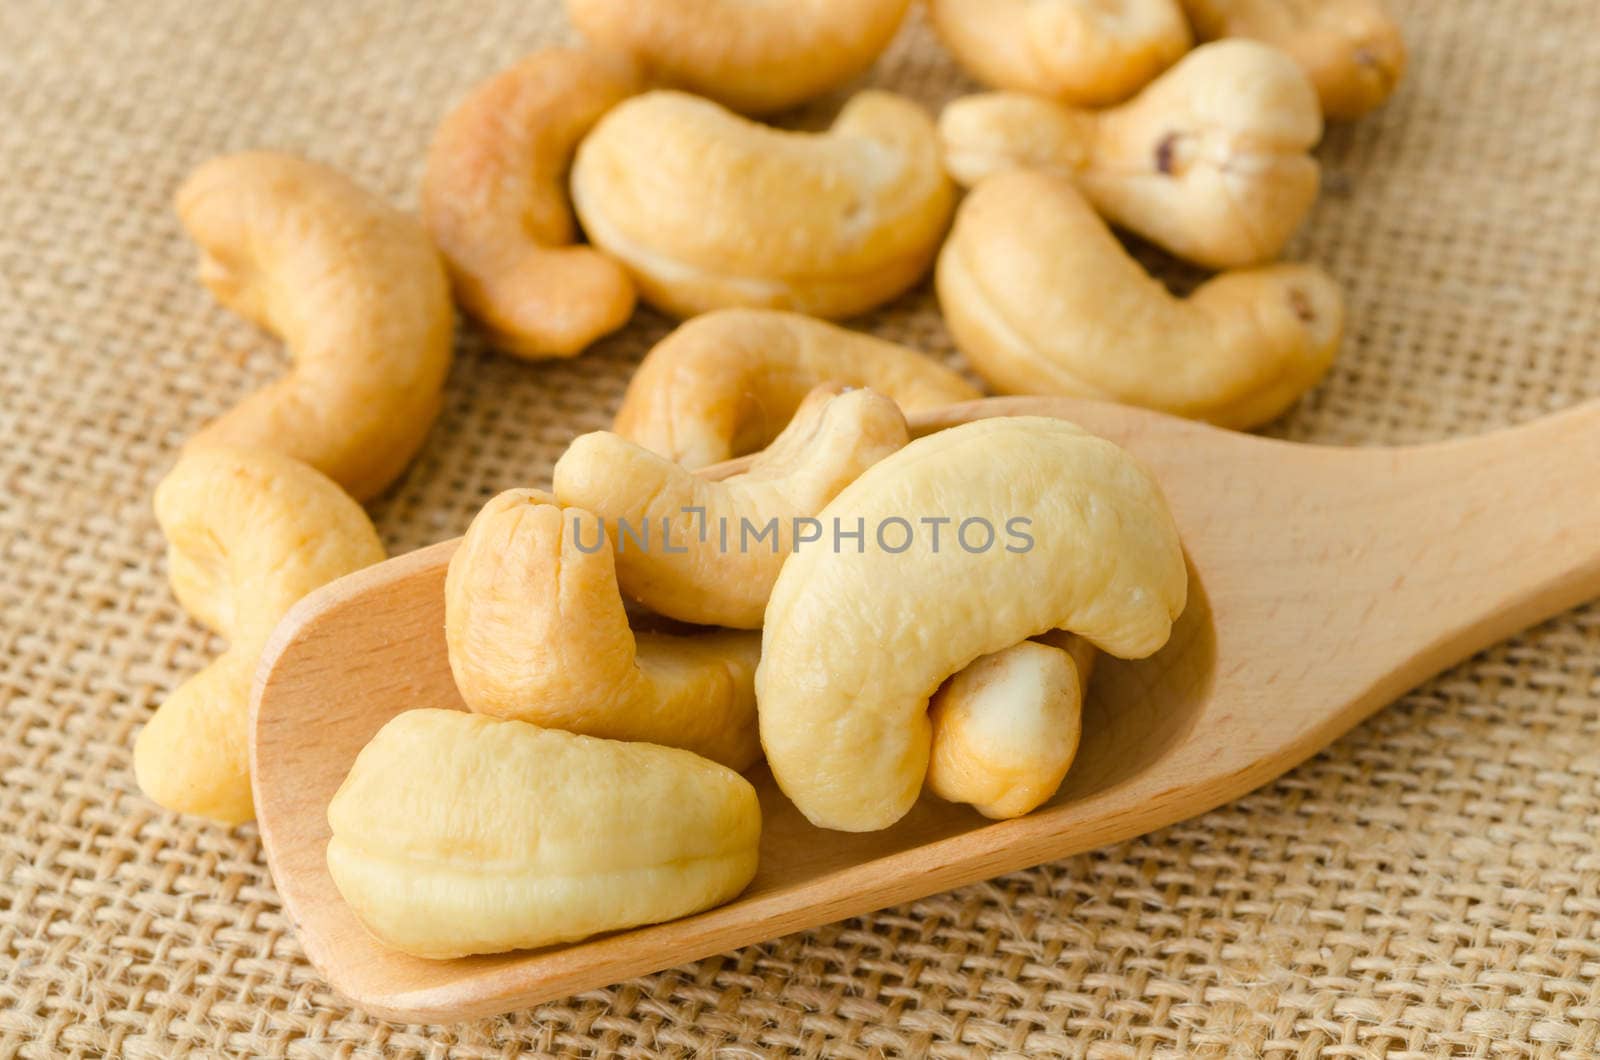 cashew nuts with salt and wooden spoon on sack background.